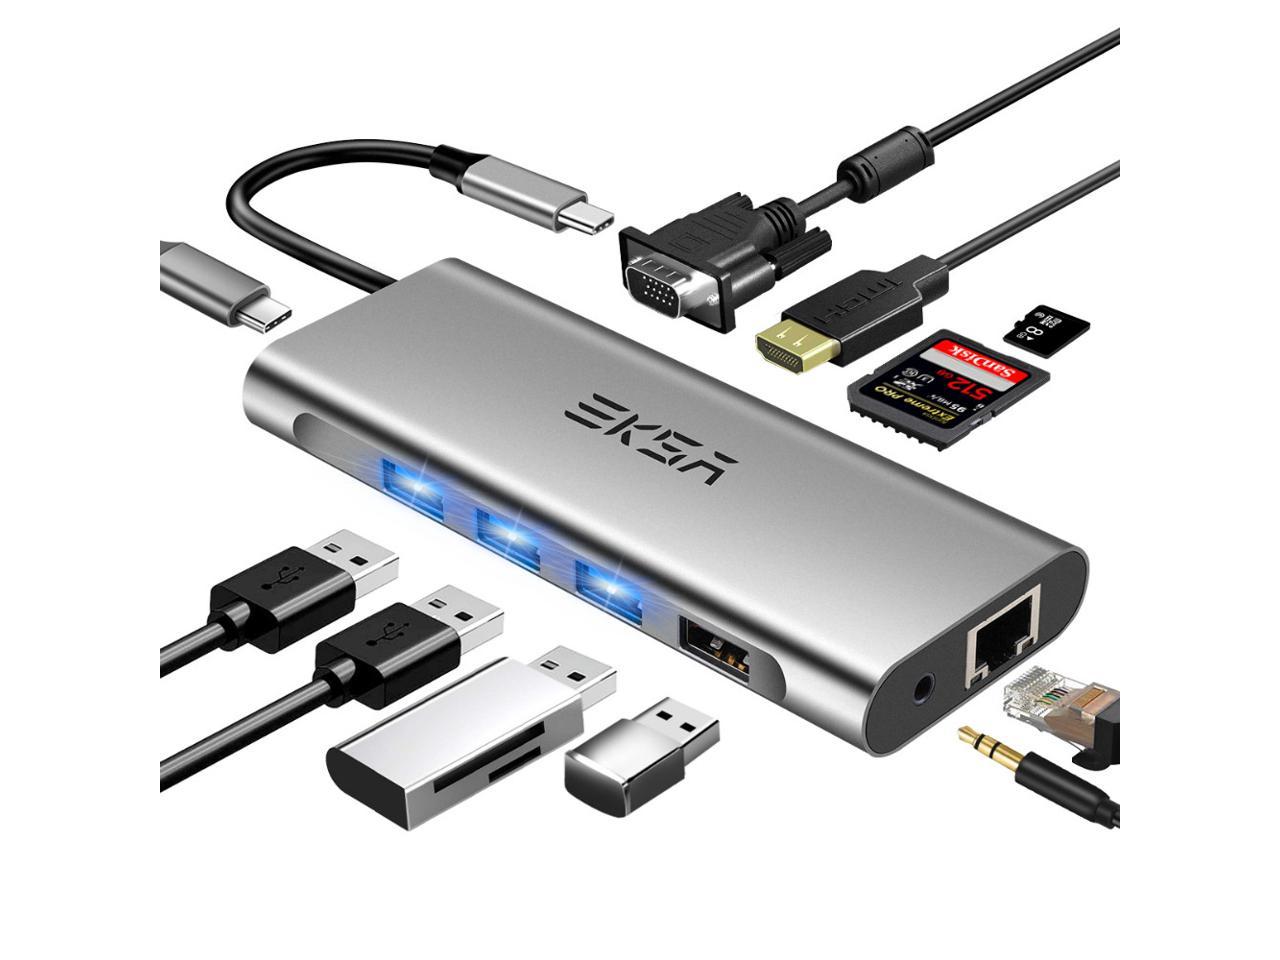 XPS 6-in-1 Type C Adapter with Ethernet Port 3 USB 3.0 Ports iHaper USB C hub and More 4K USB C to HDMI USB-C Power Delivery for MacBook/MacBook Air/MacBook Pro 2018/2017/2016 ChromeBook